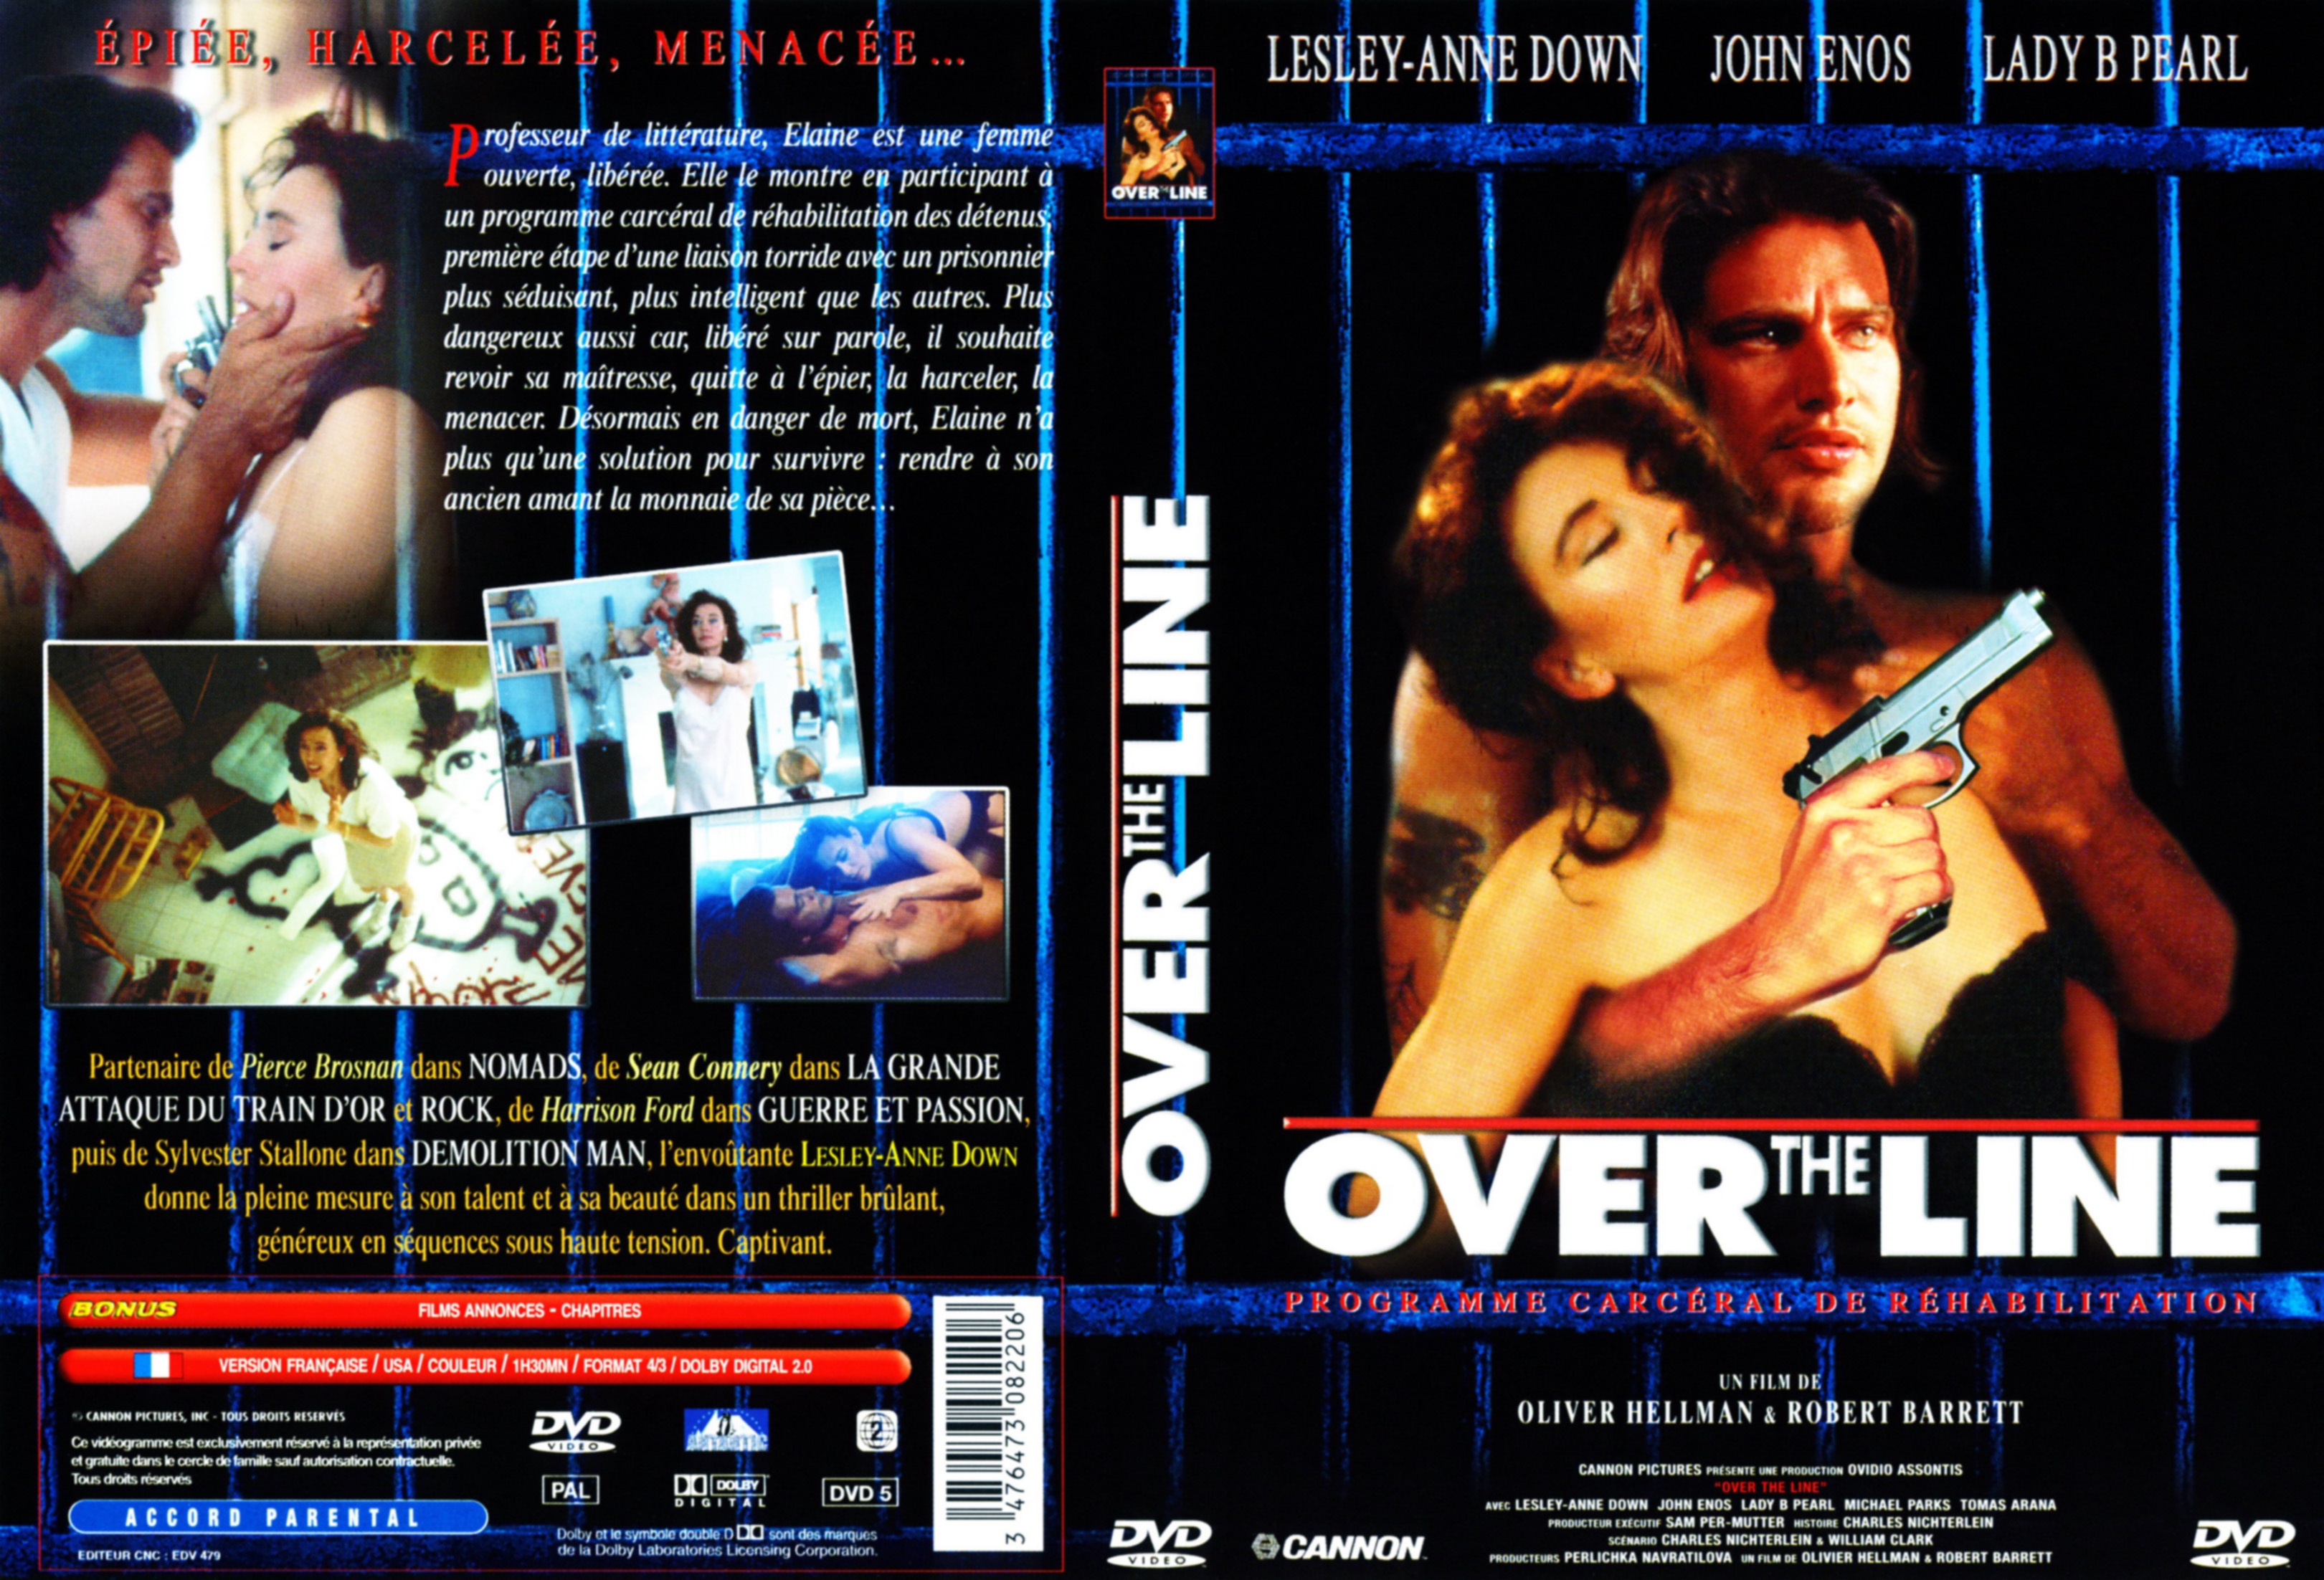 Jaquette DVD Over the line